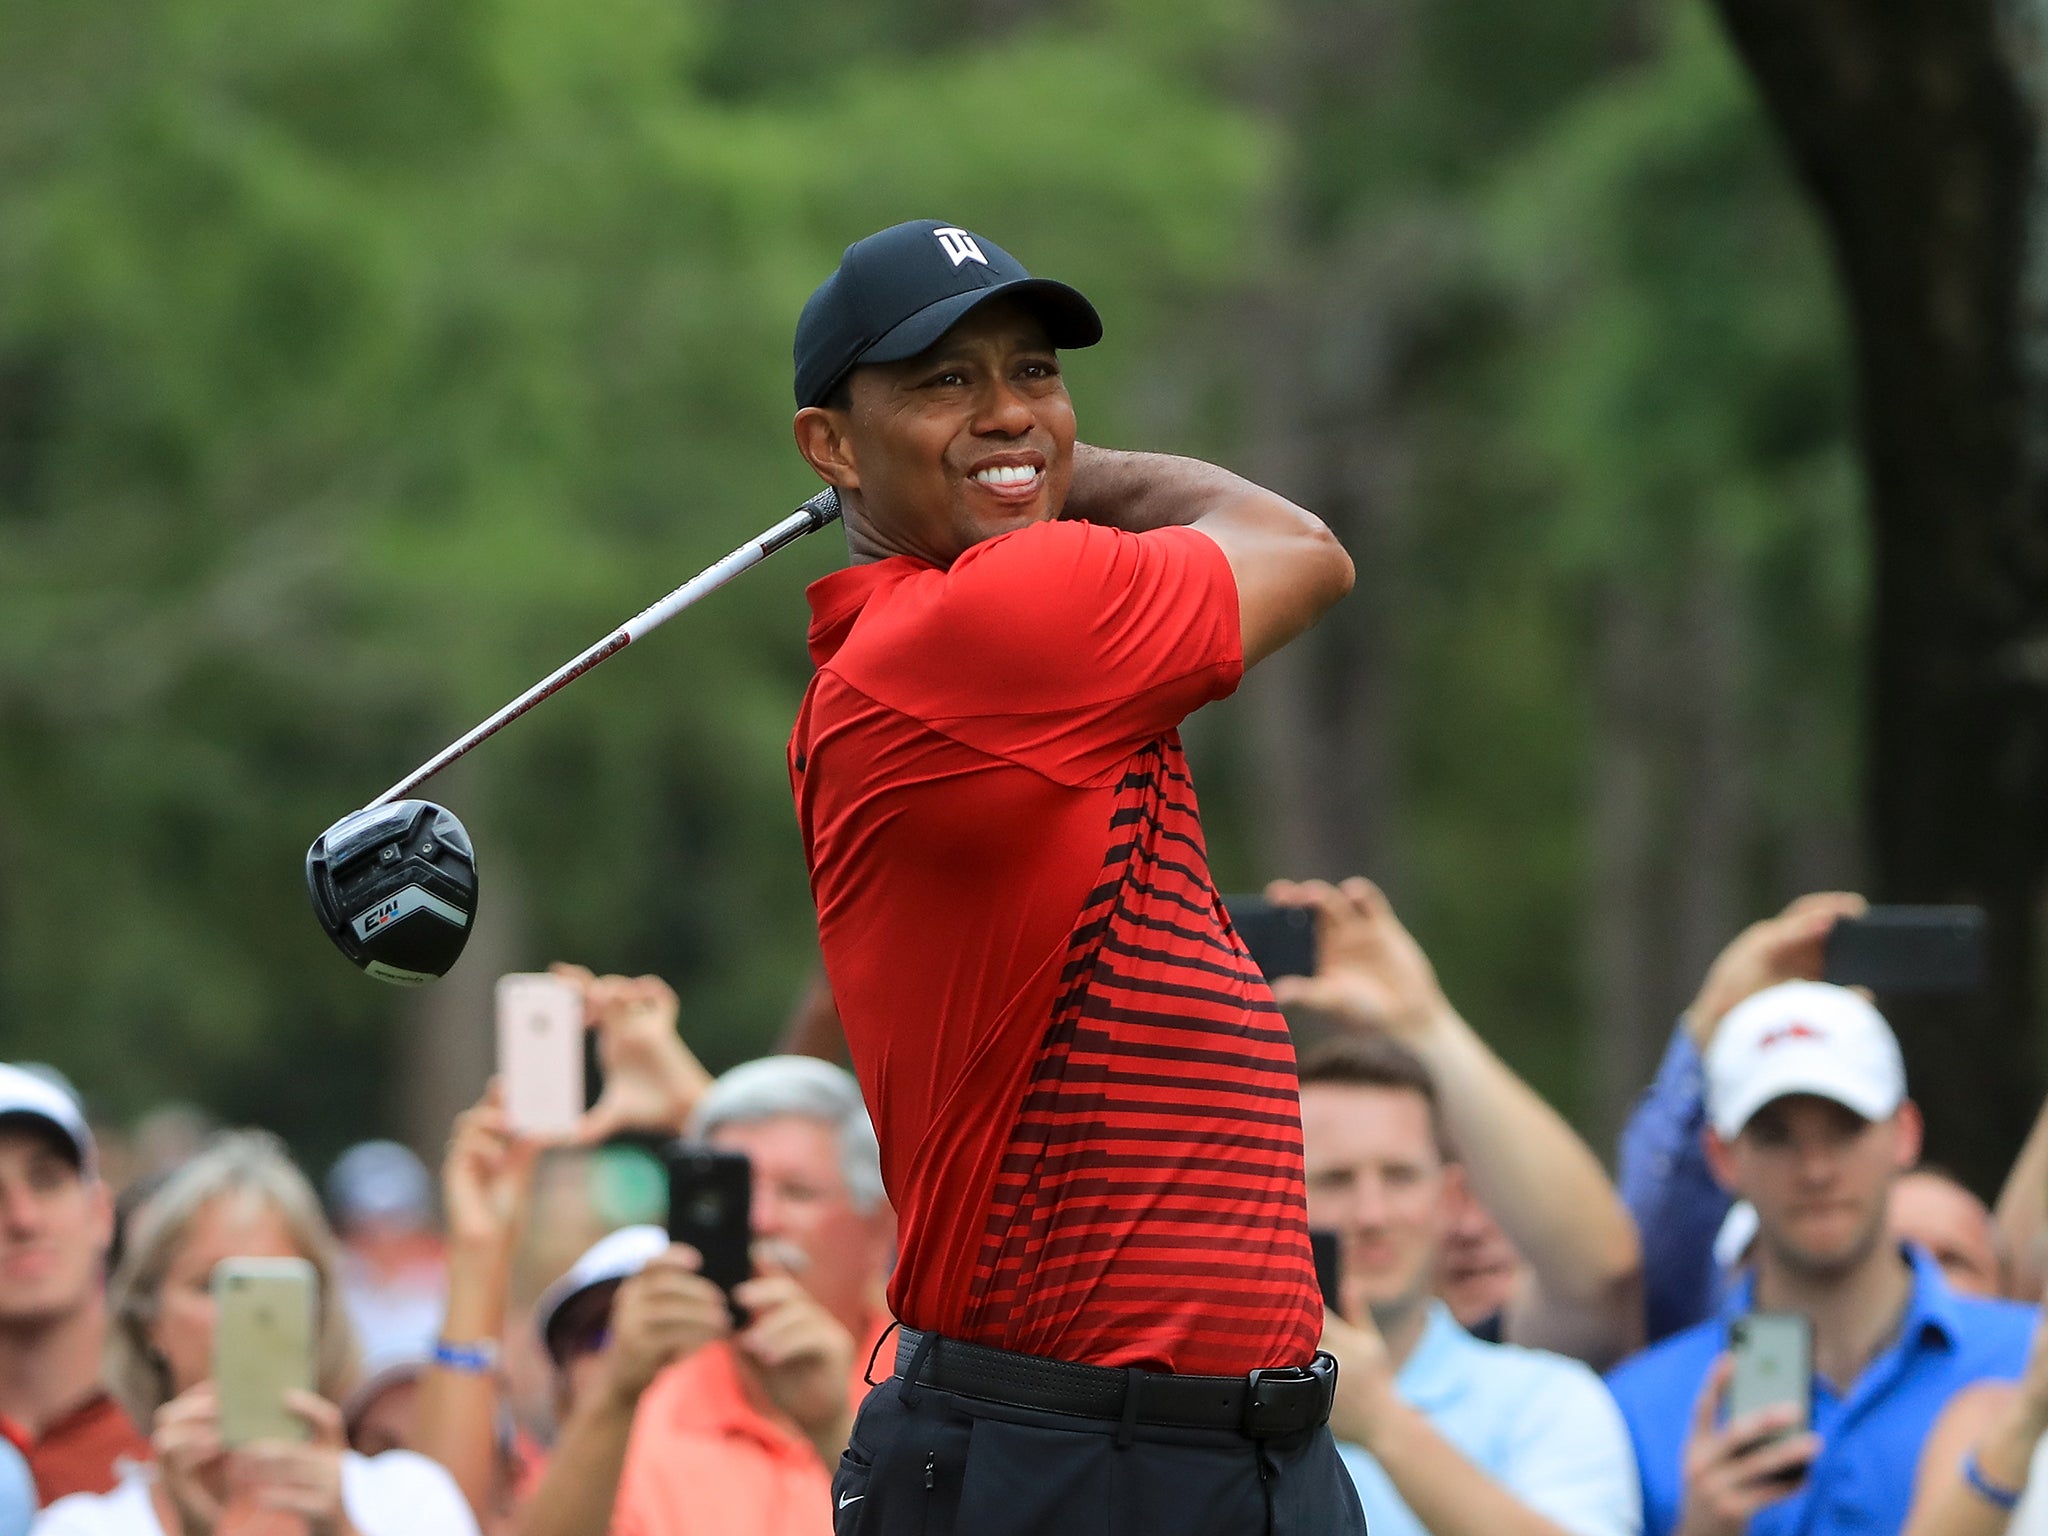 Tiger Woods finished tied-second at the Valspar Championship just one shot behind winner Paul Casey